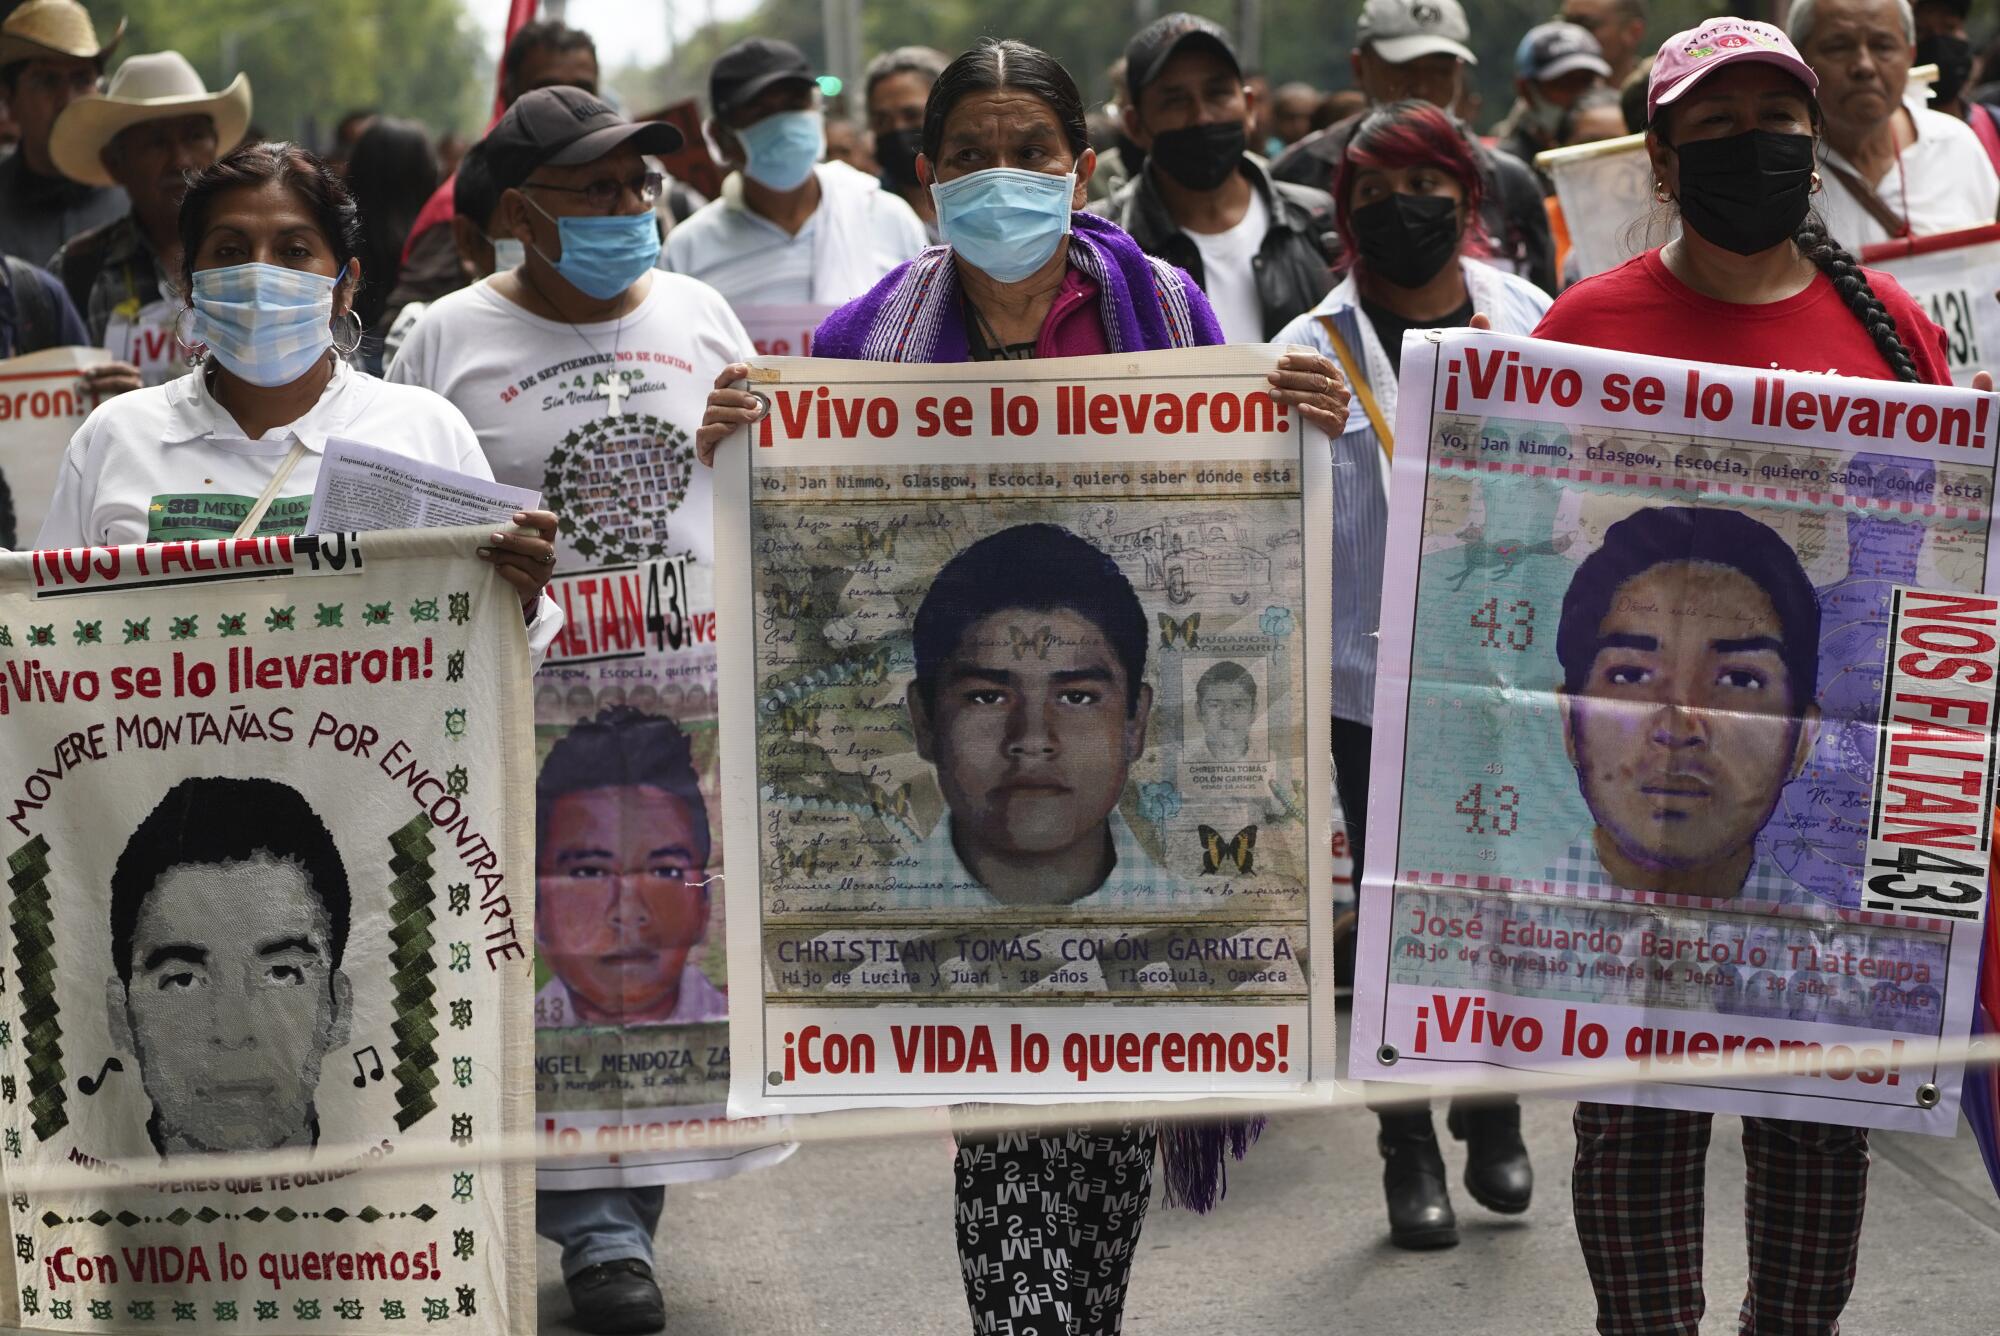 People wearing masks march while holding posters bearing images of individual men